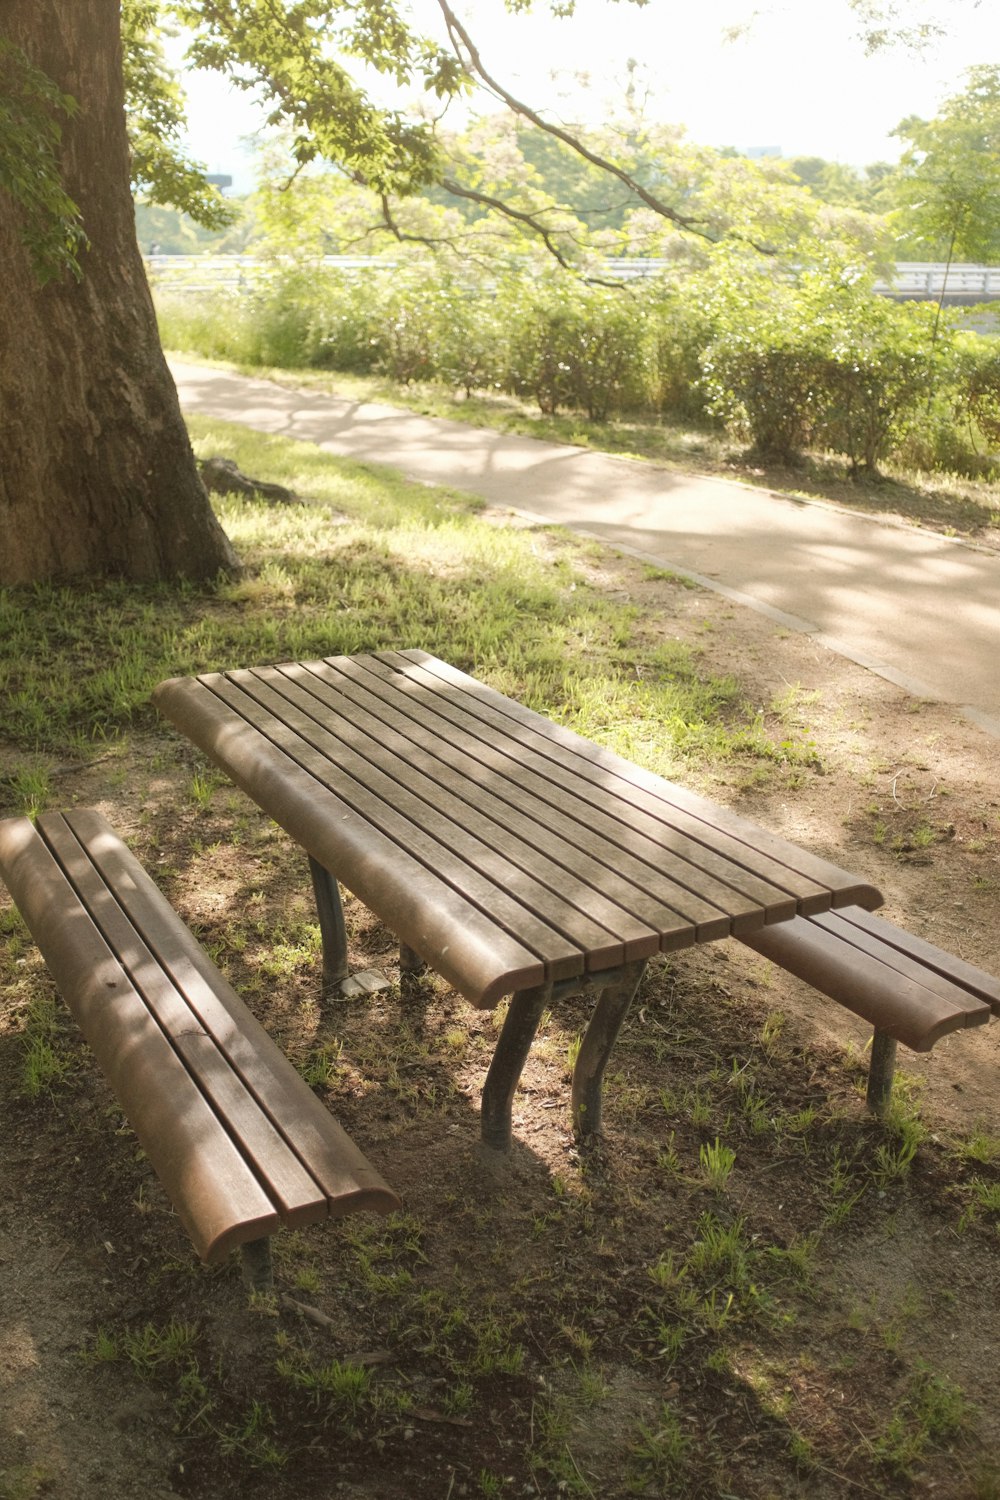 brown wooden bench near green trees during daytime